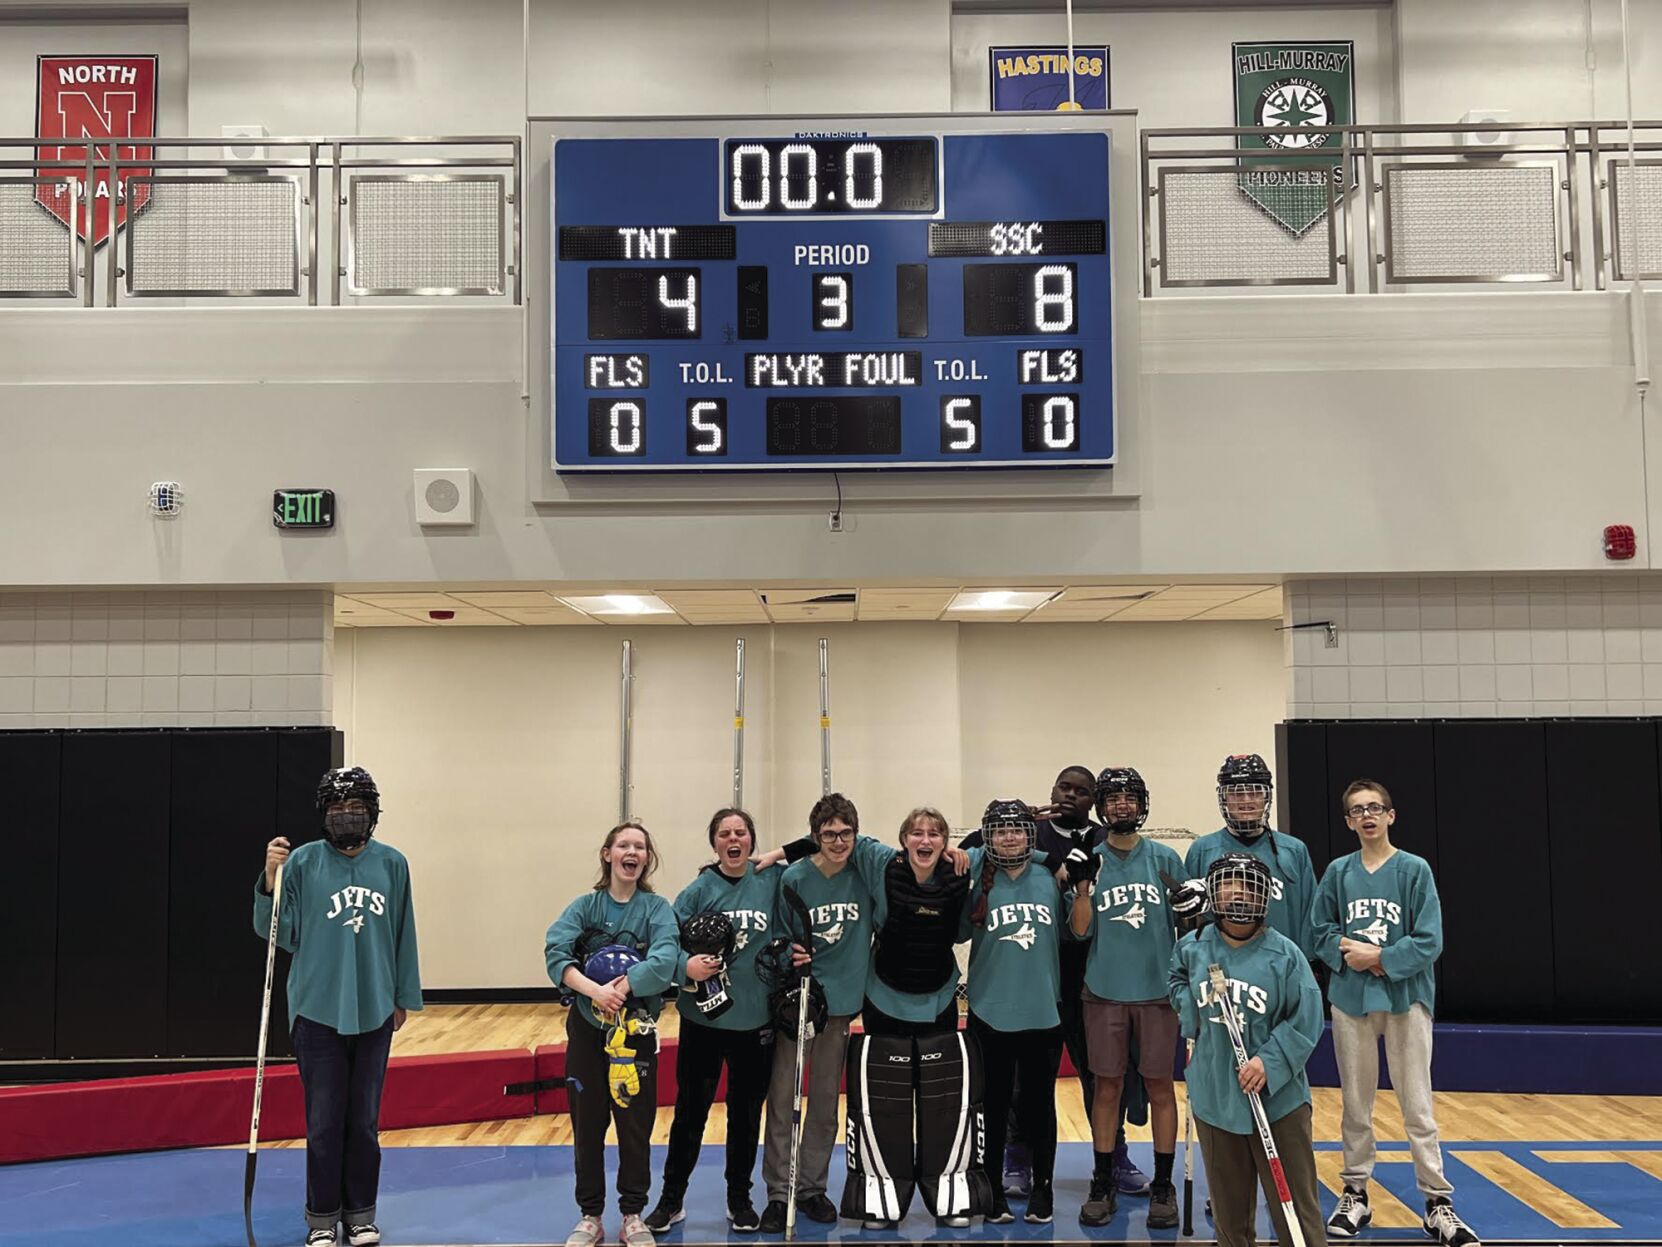 Jets get on a run to reach 15th state adapted floor hockey tournament